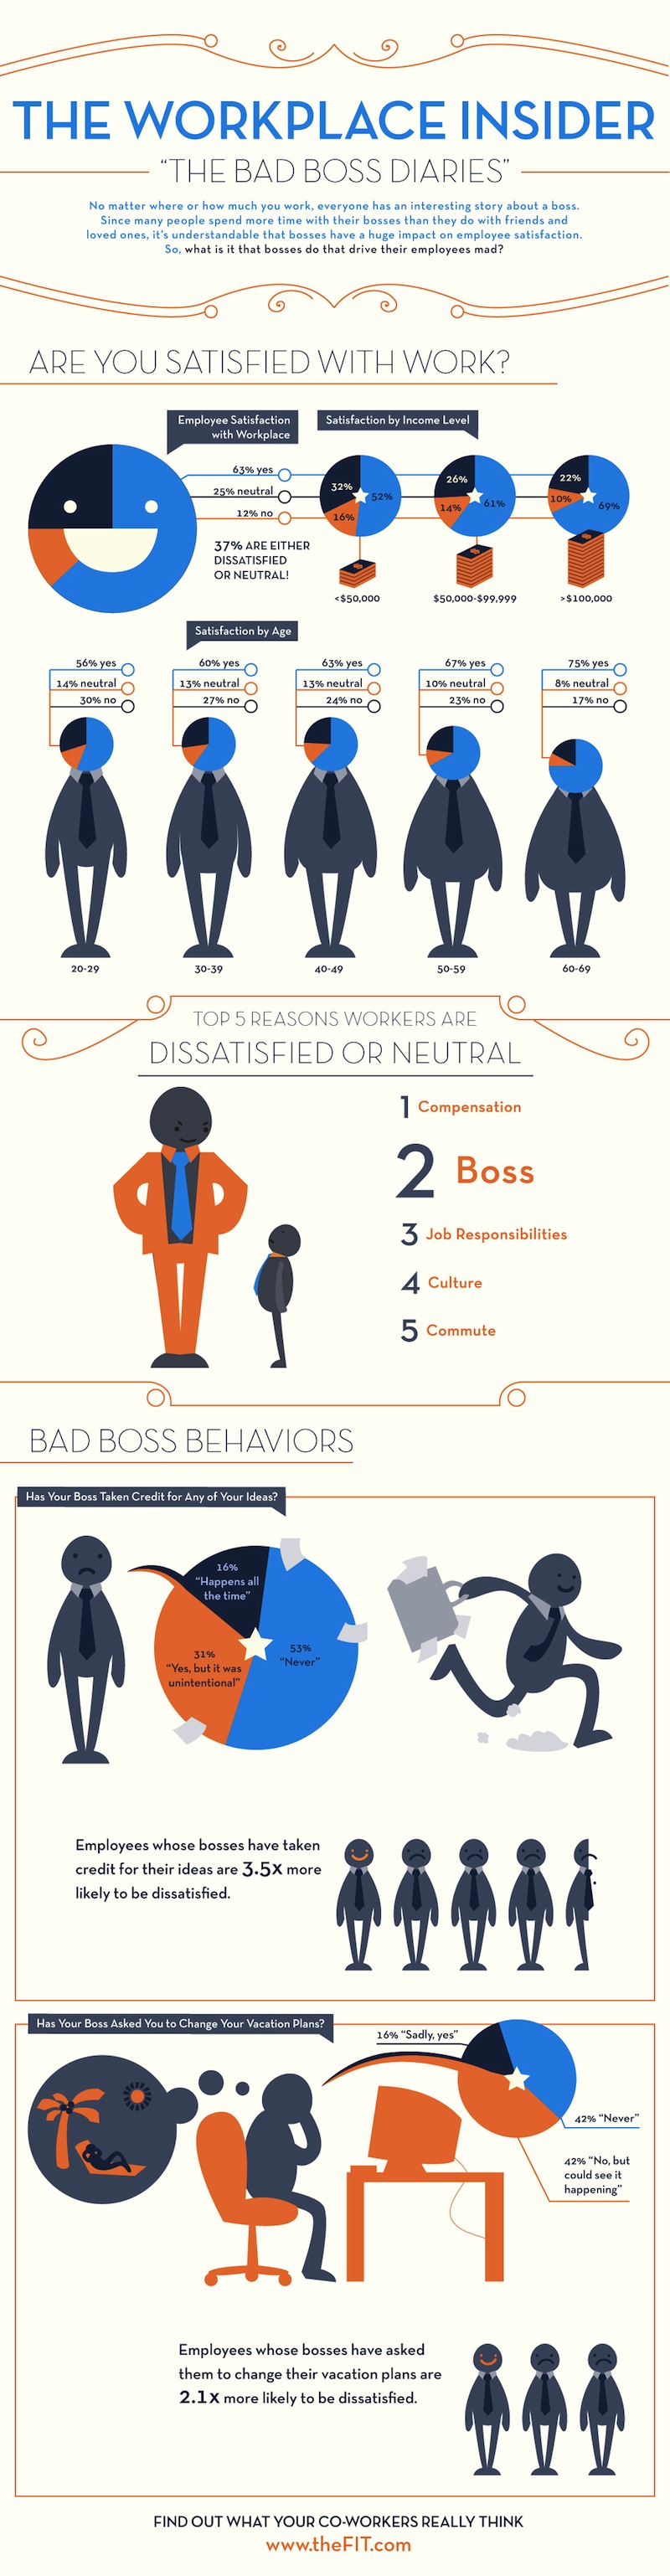 Why People Hate Their Jobs infographic